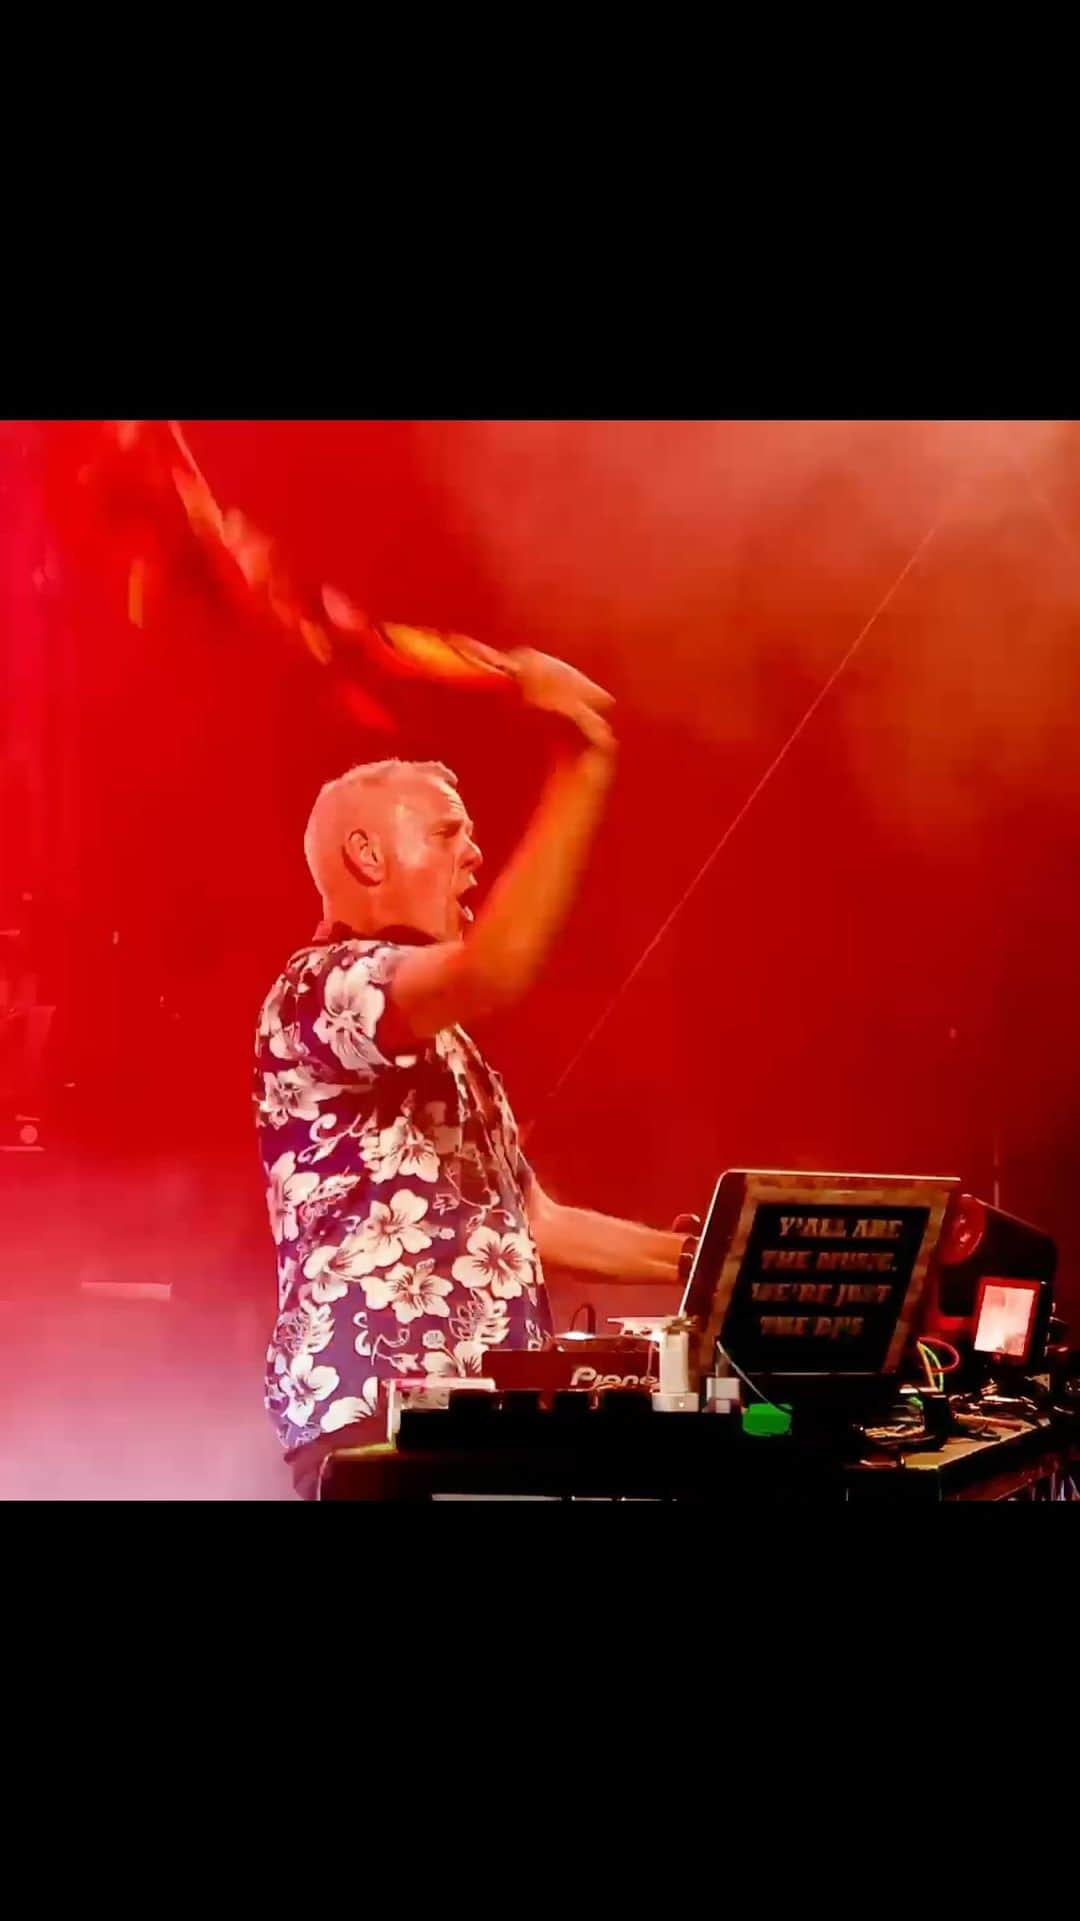 FatboySlimのインスタグラム：「Tickets are on sale now for the Fatboy Slim Loves... Summer Tour! LINK IN BIO  Fri Jun 14th - Fairview Park, Dublin  Sat Jun 15th - Eden Sessions, Cornwall (on-sale Monday) Fri Jul 5th - Castlefield Bowl, Manchester Sat Jul 6th - Open Air Theatre, Scarborough Sun Jul 7th - Tofte Manor, Bedfordshire Fri Jul 19th - SWG3 Galvanizers Yard, Glasgow (Just Added) Sat Jul 20th - SWG3 Galvanizers Yard, Glasgow Fri Aug 9th - Galway Airport, Galway Sat Aug 24th -The Piece Hall, Halifax」